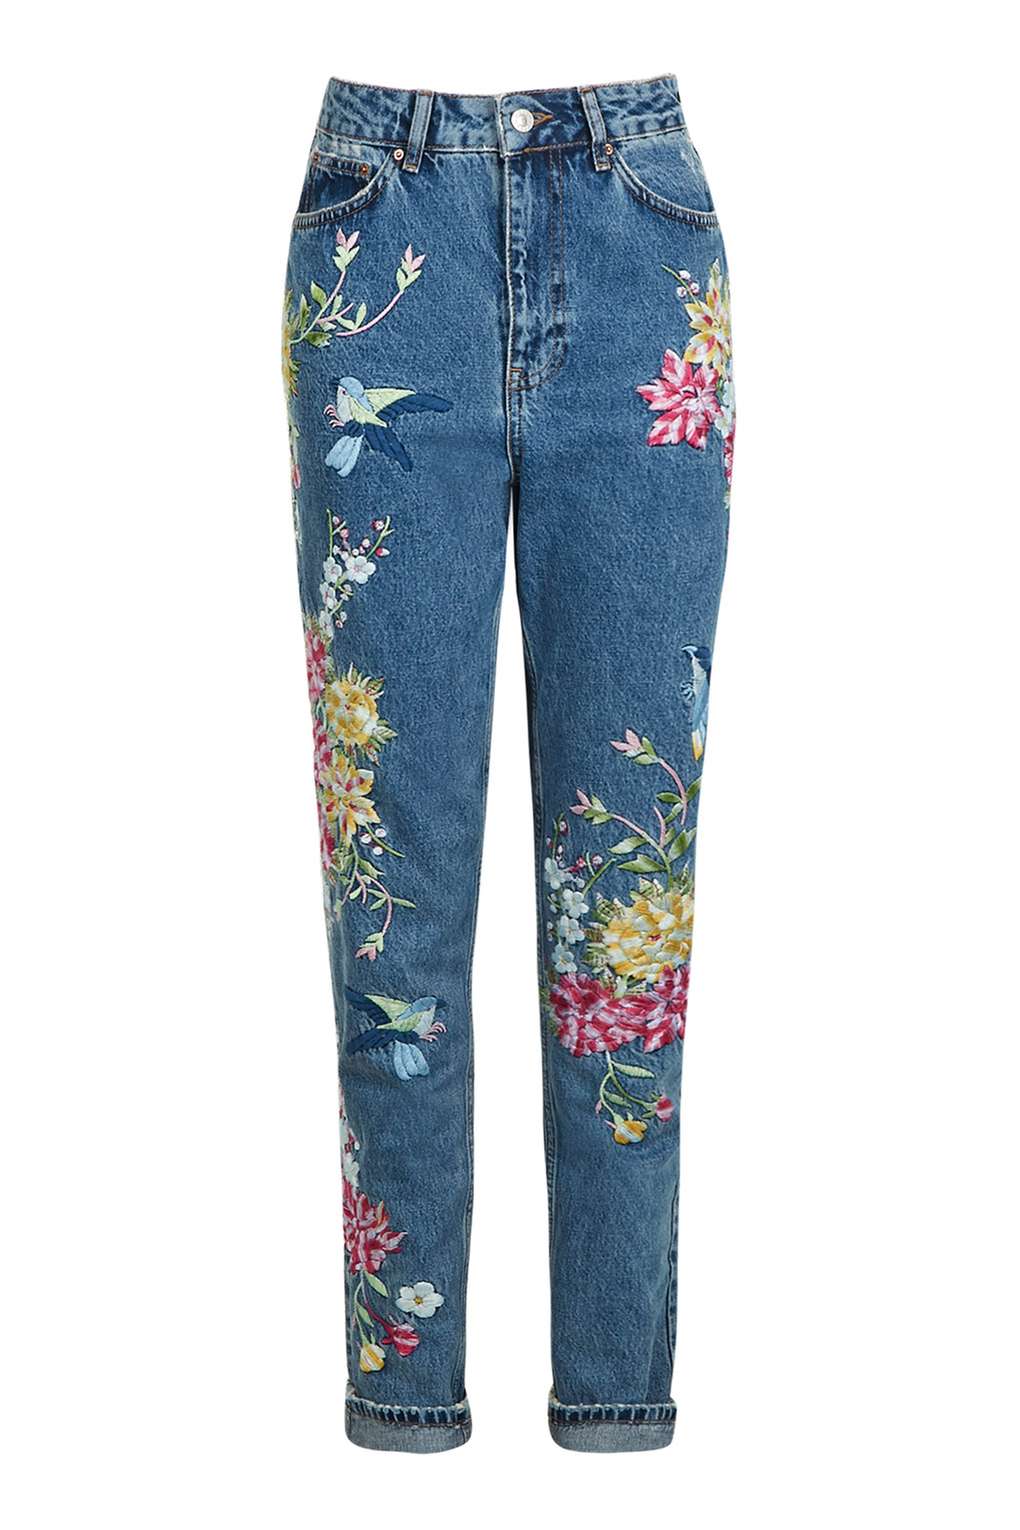 embroidered-jeans